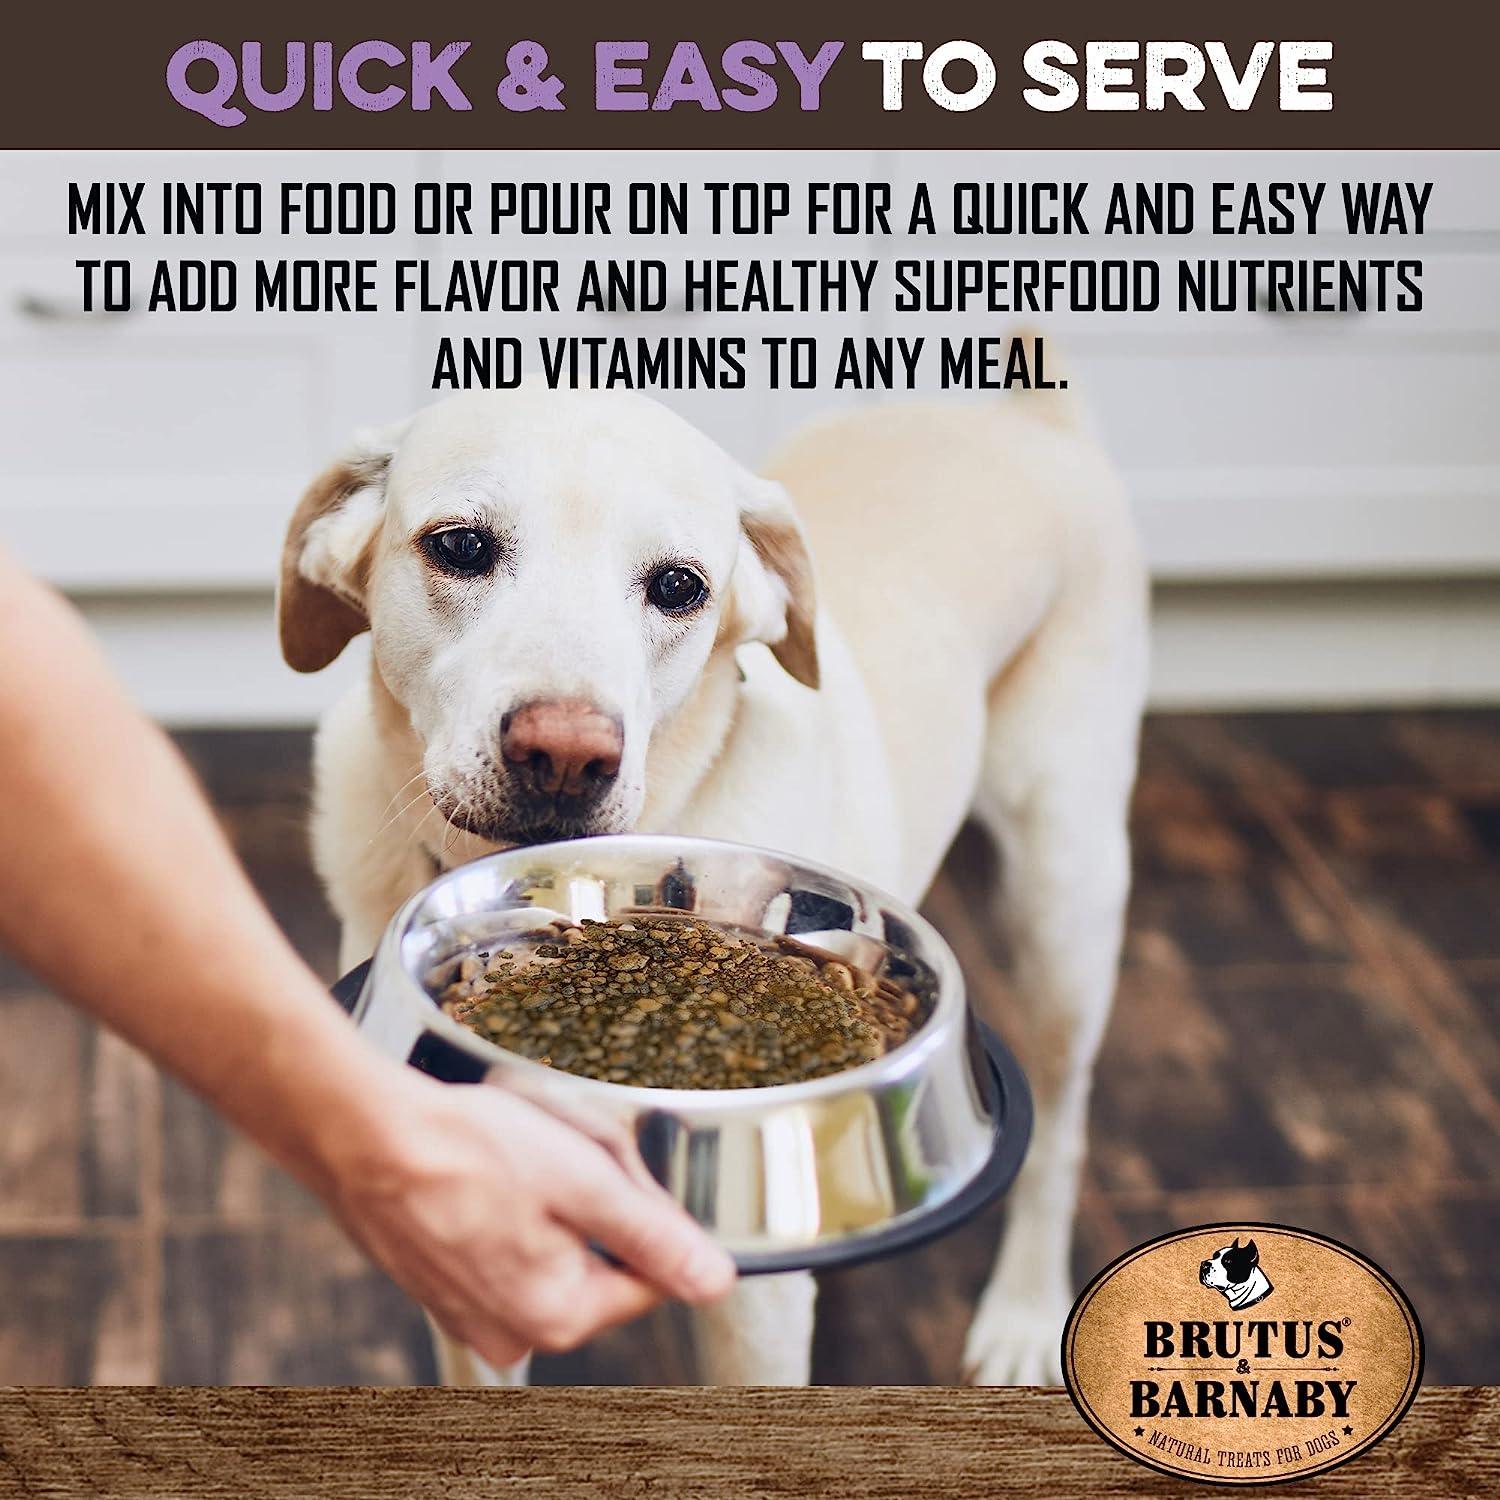 Dog Food Topper - Superfood - Perfect Vegan Meal Enhancer For Bored Or Picky Eaters - Brutus & Barnaby